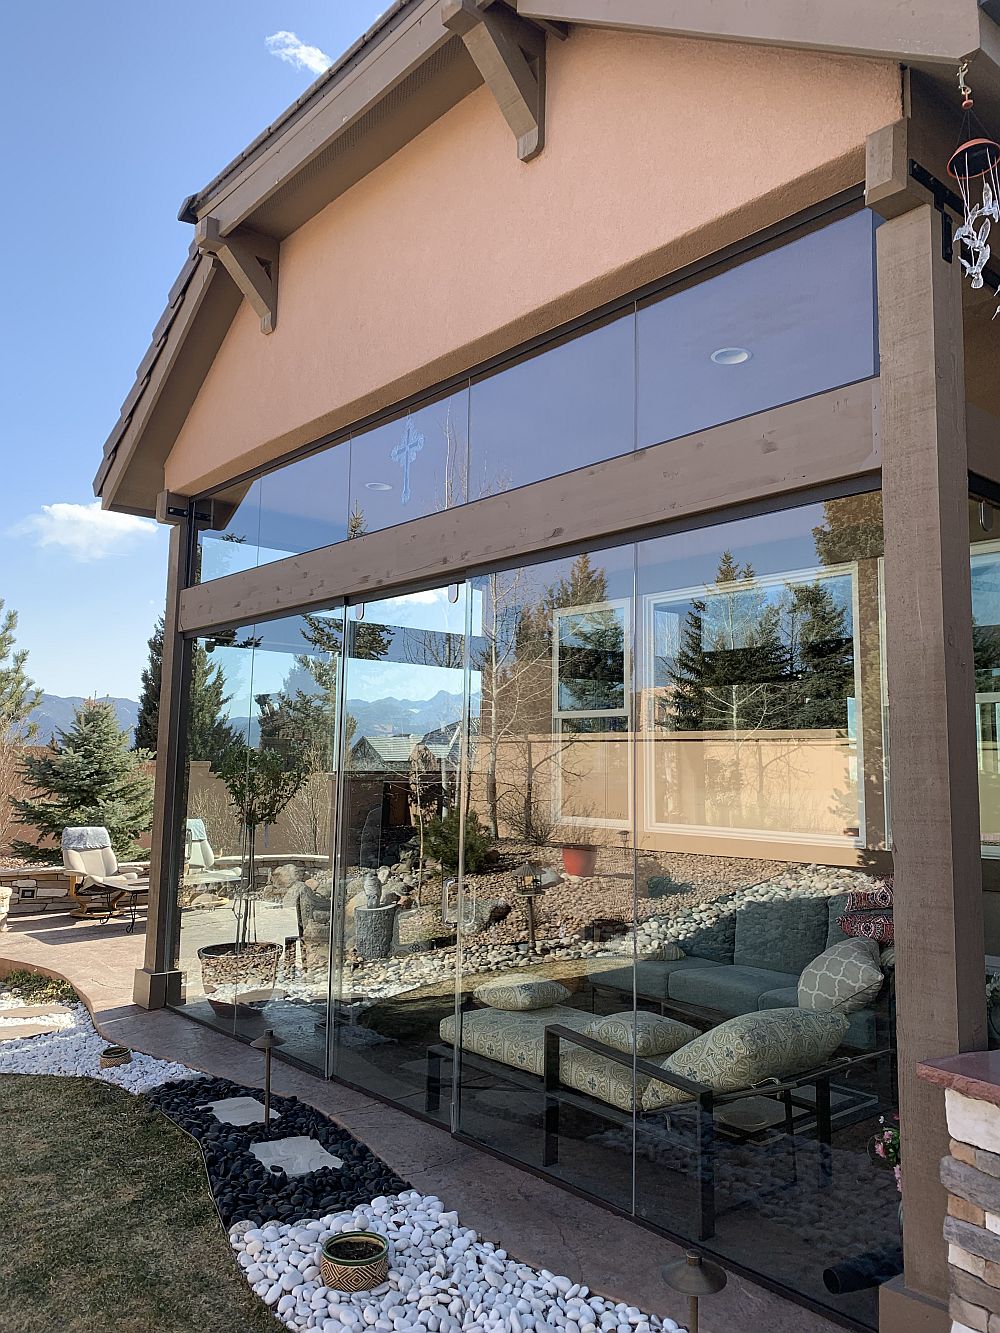 Covered patio turned into 3-season room with glass walls